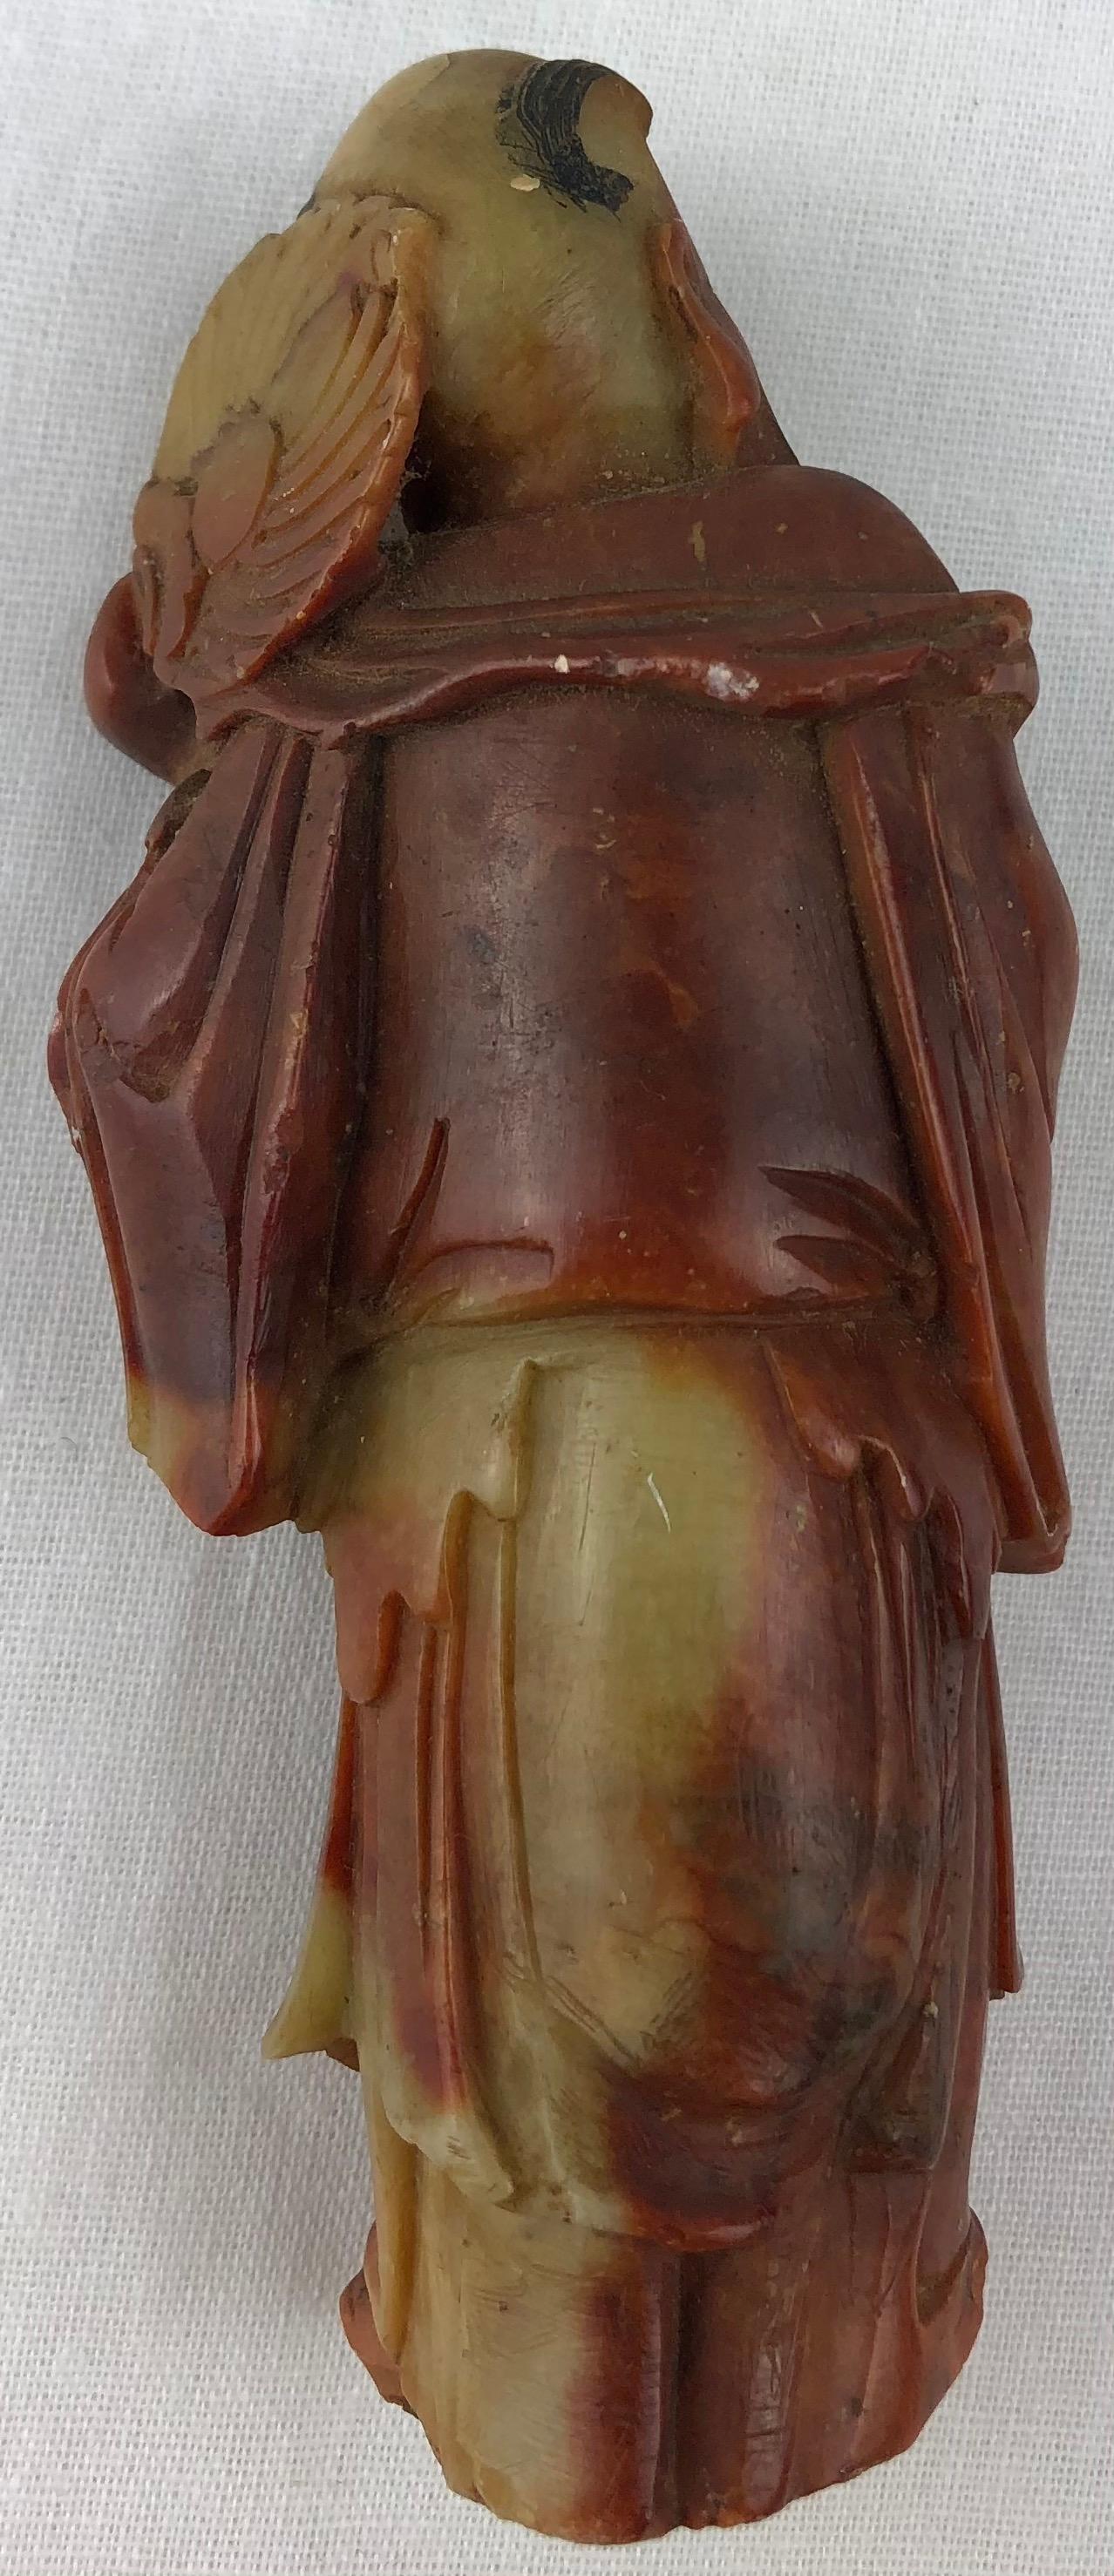 Artfully carved from amber colored marble this figurative Chinese statue or sculpture 
stands 4 1/8